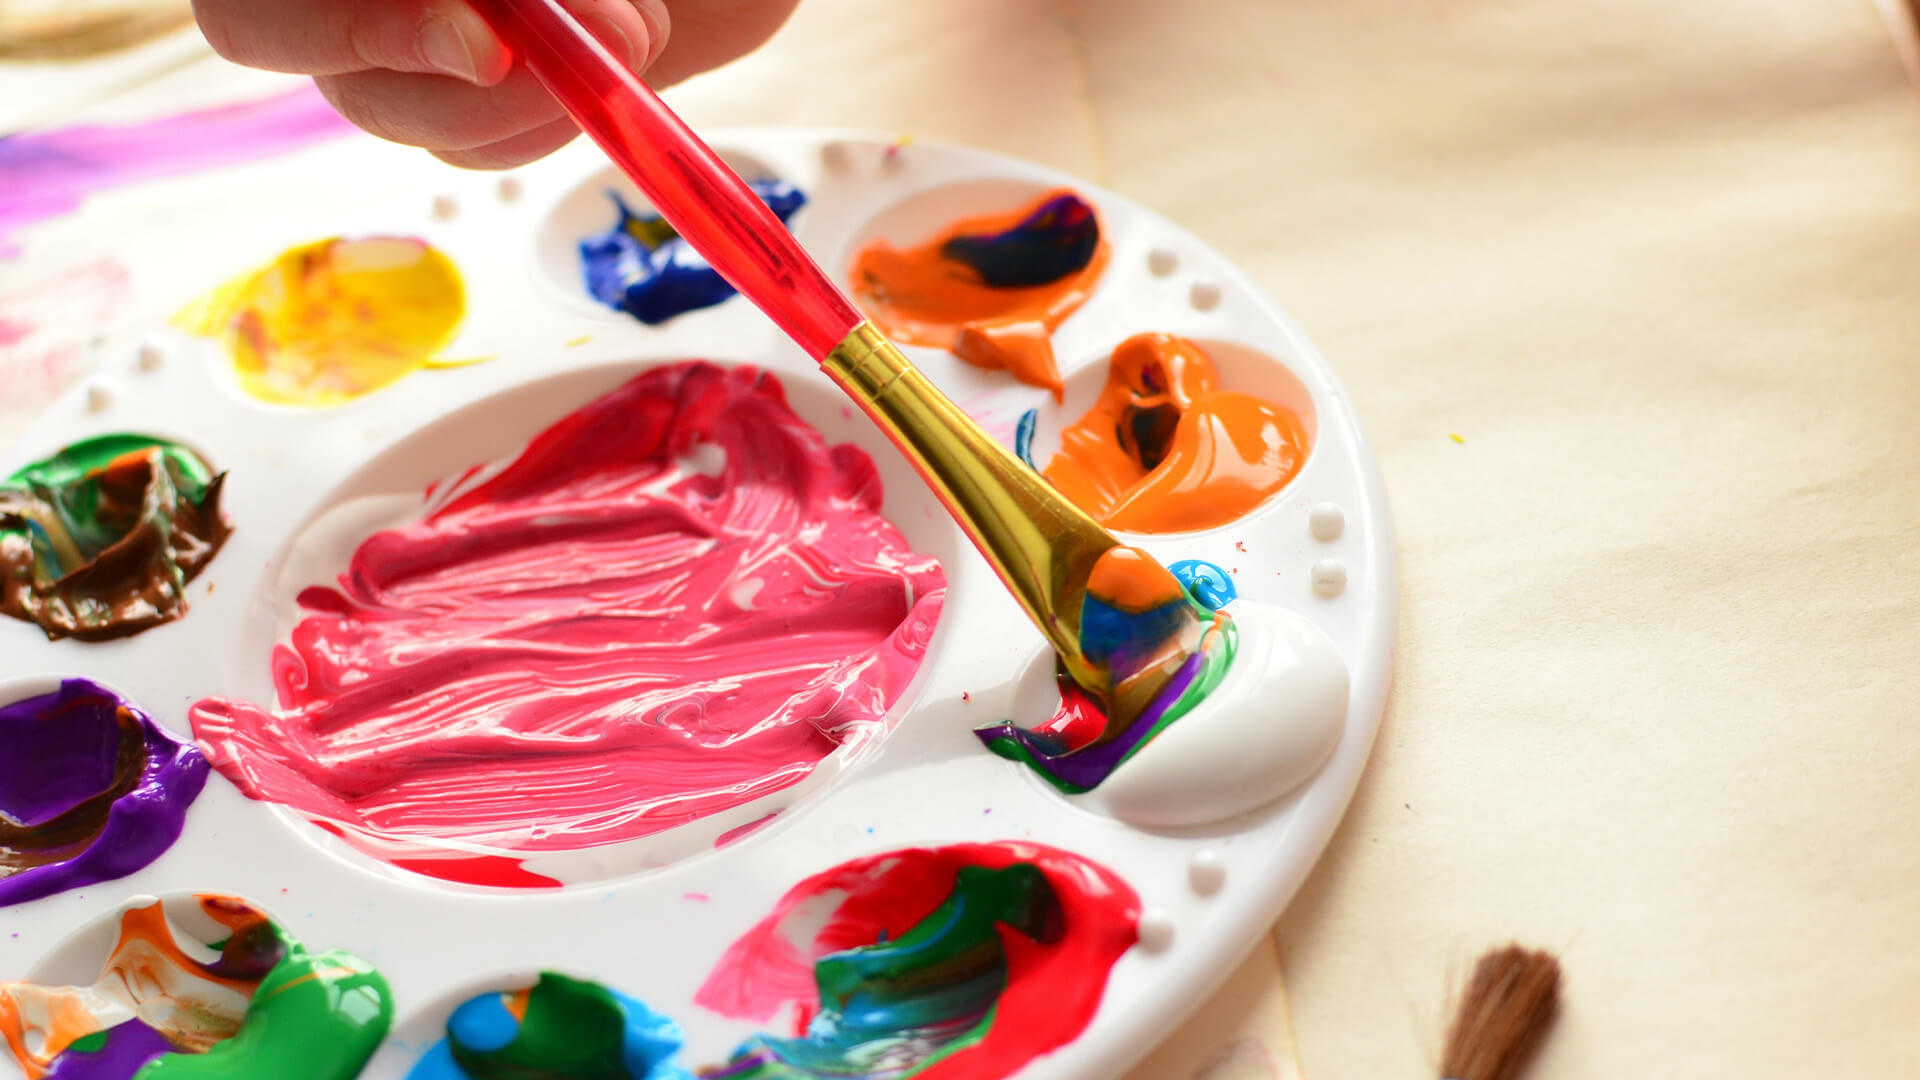 Closeup of a plastic painter's pallette with a child dipping a brush into the colours